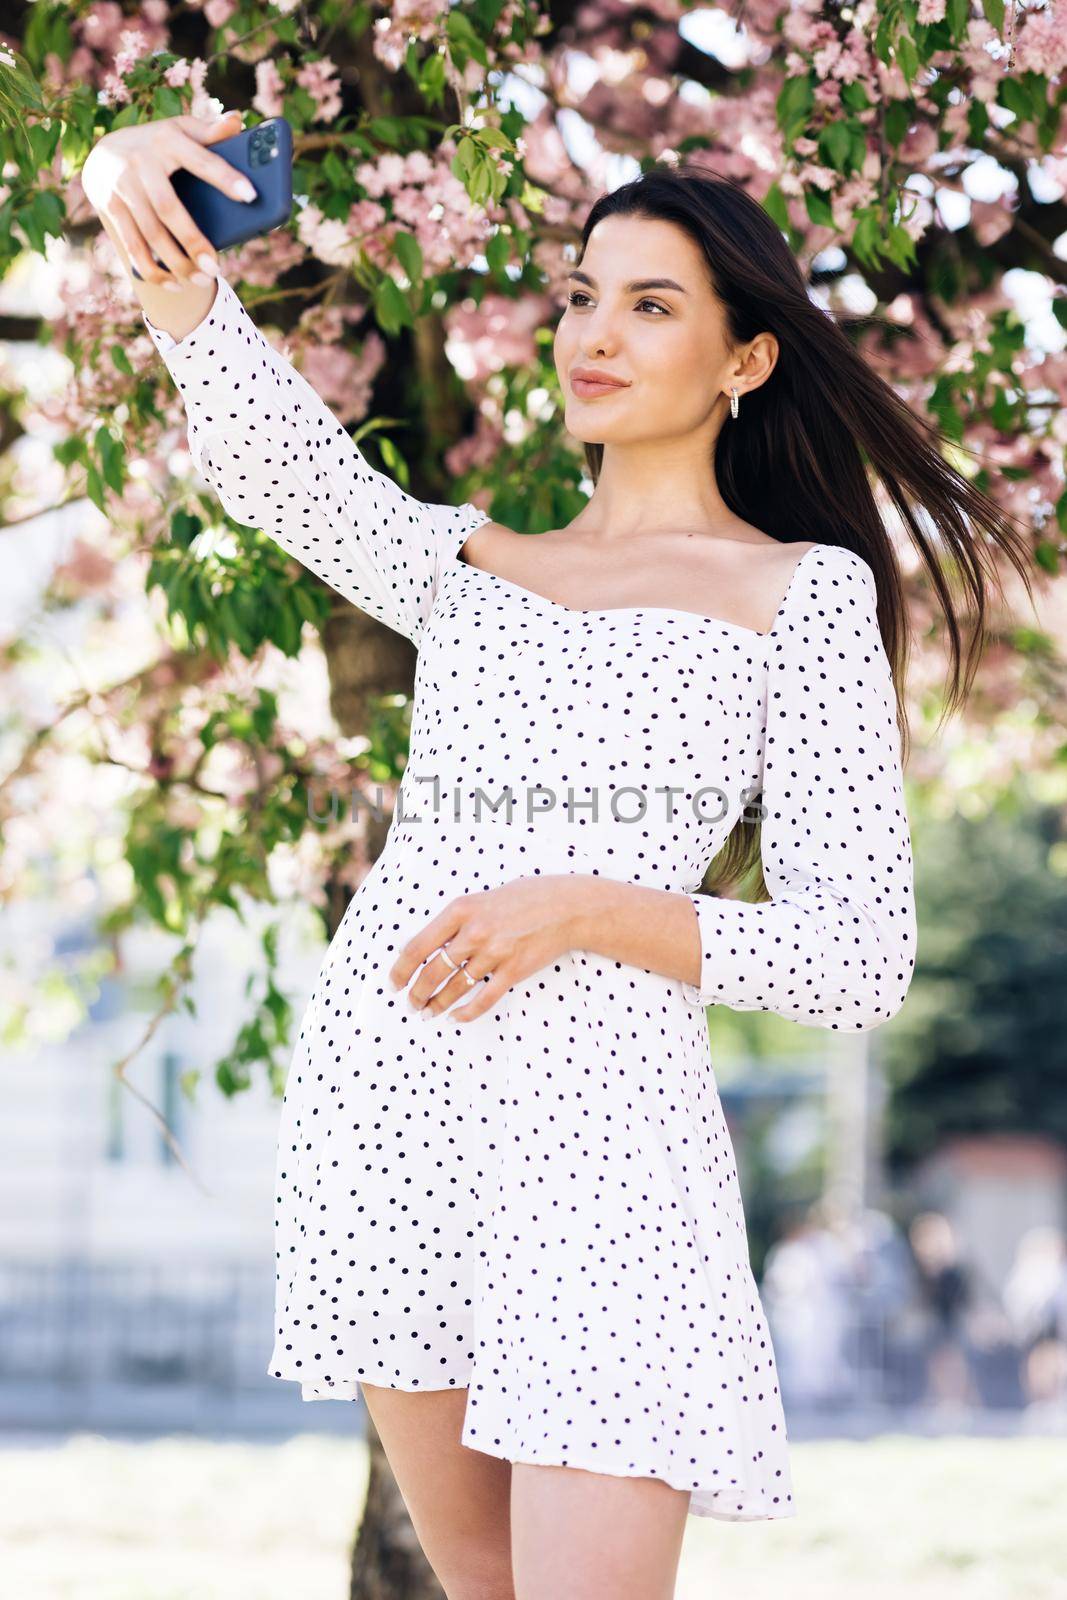 Female showing positive face emotions. Young woman in summer white dress taking selfie self portrait photos on smartphone. Model posing on park sakura trees background by uflypro